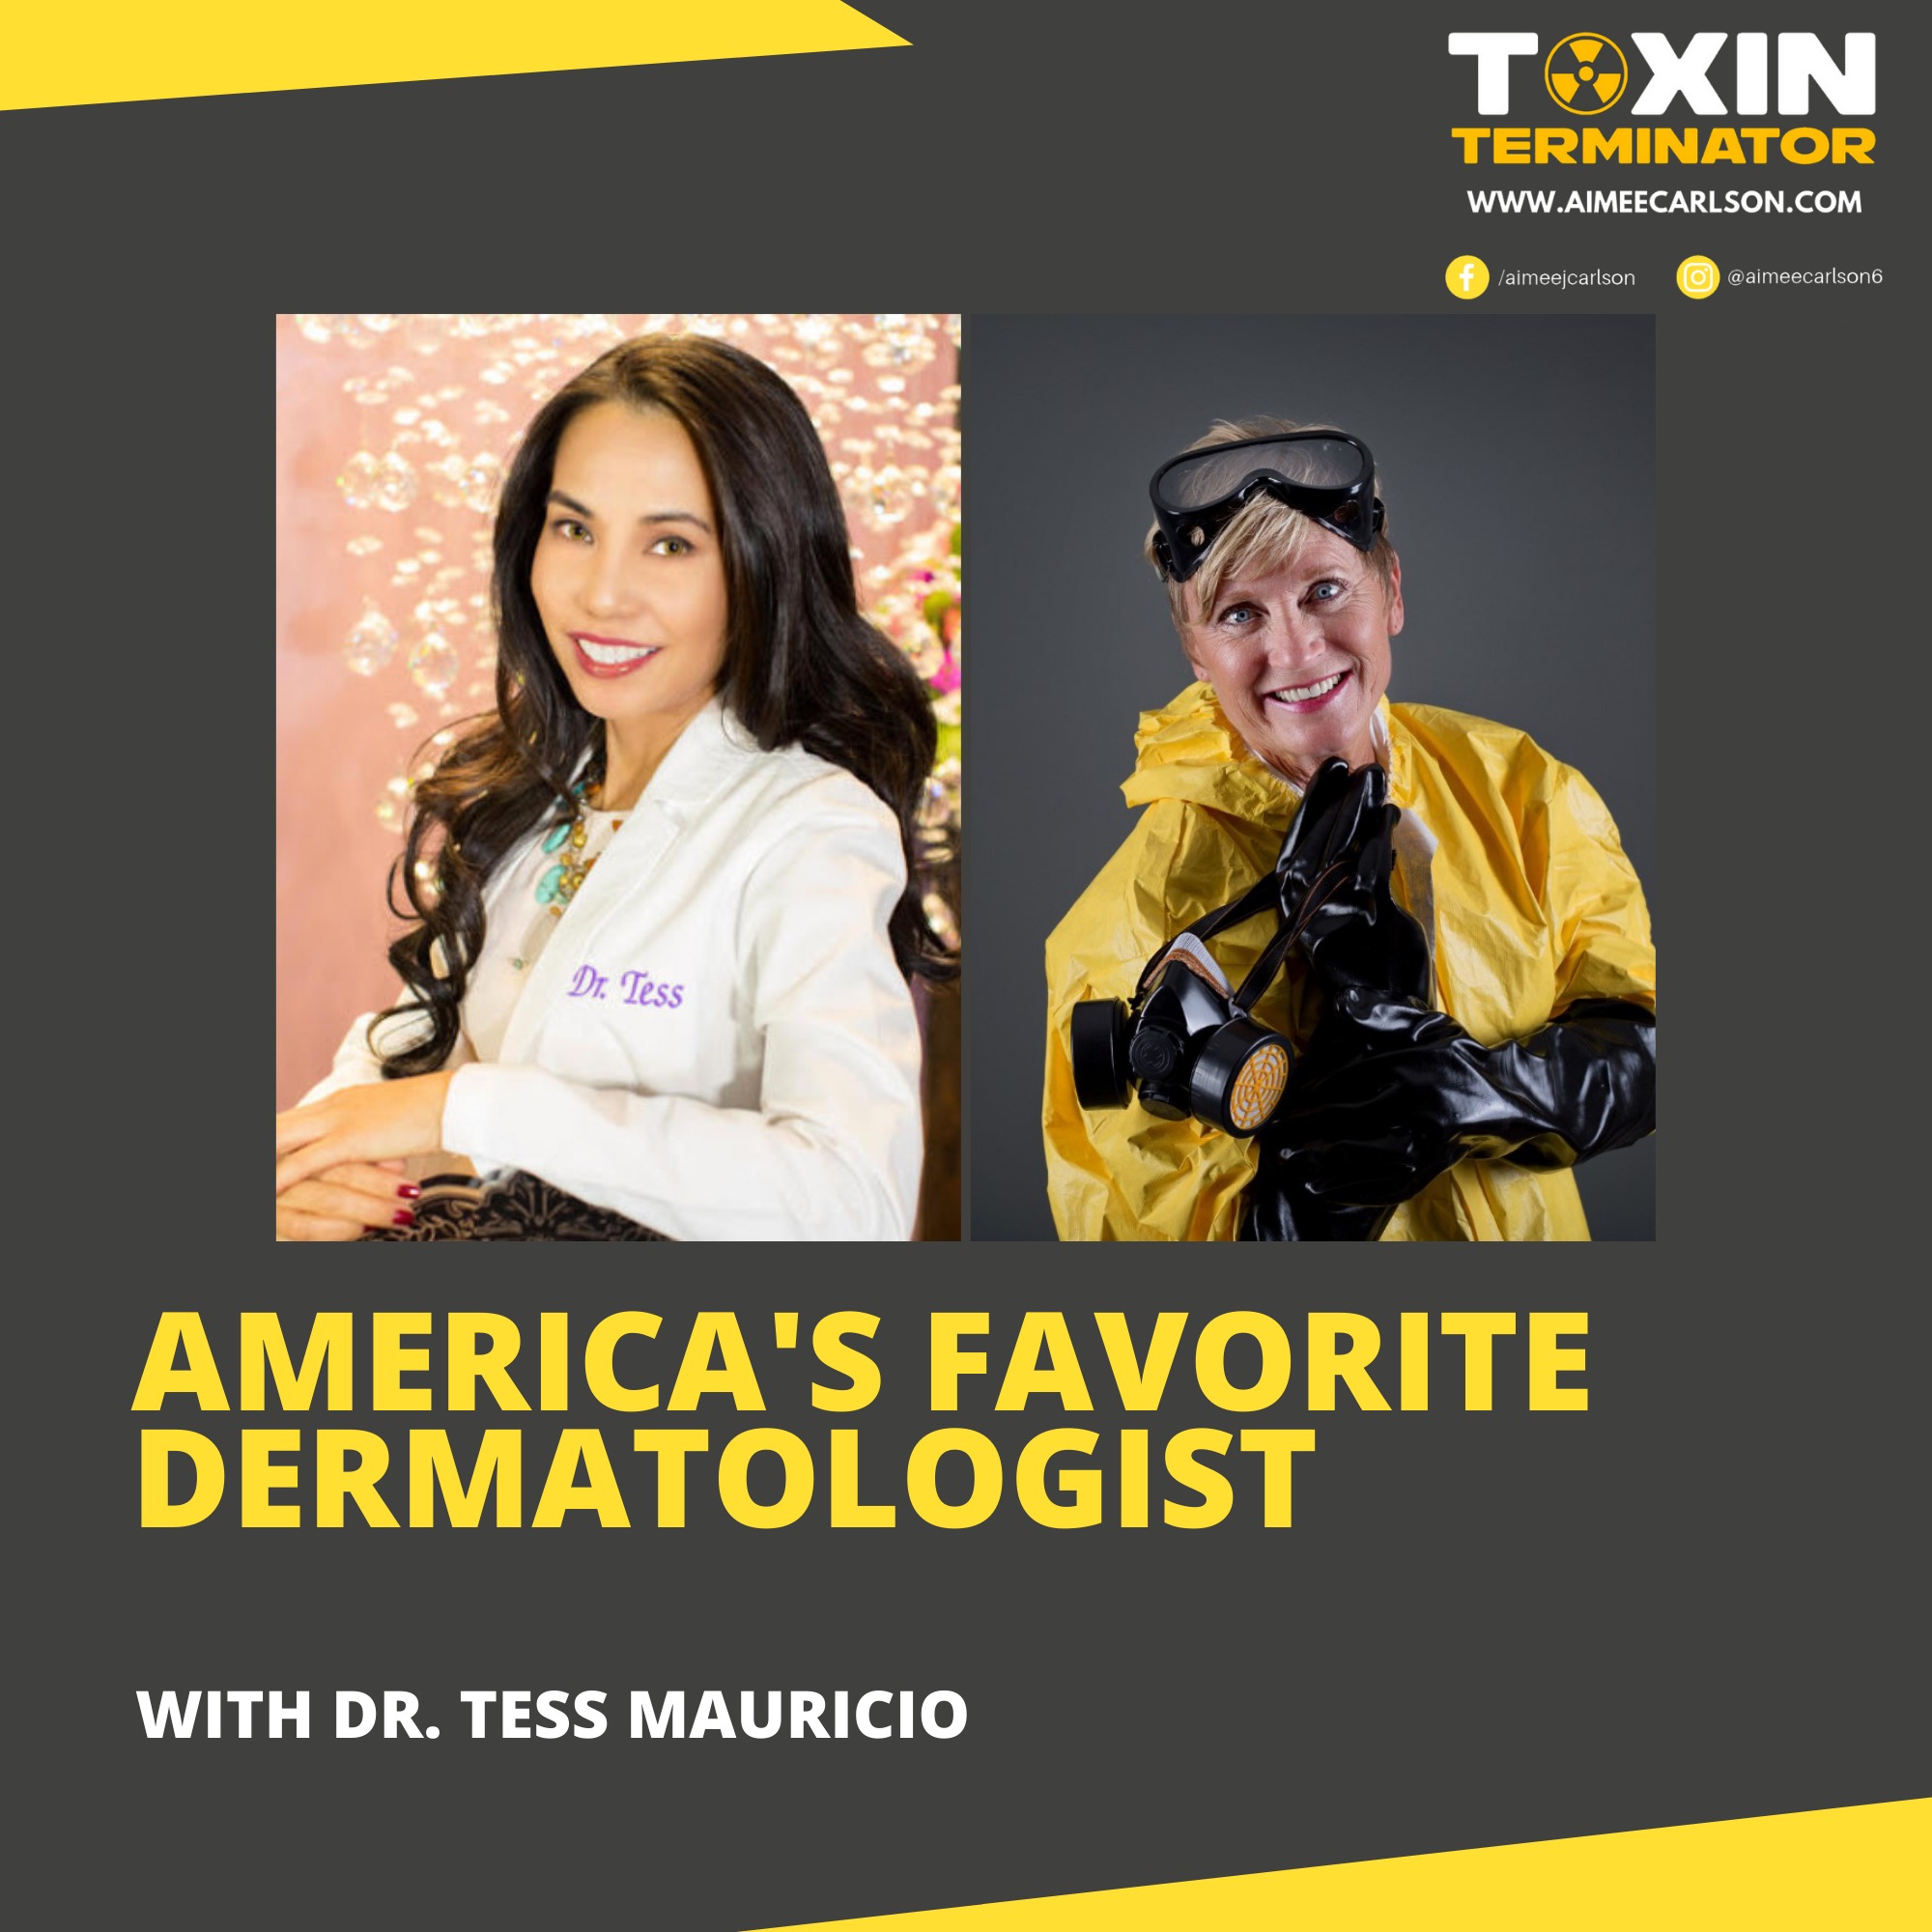 America's Favorite Dermatologist with Dr. Tess